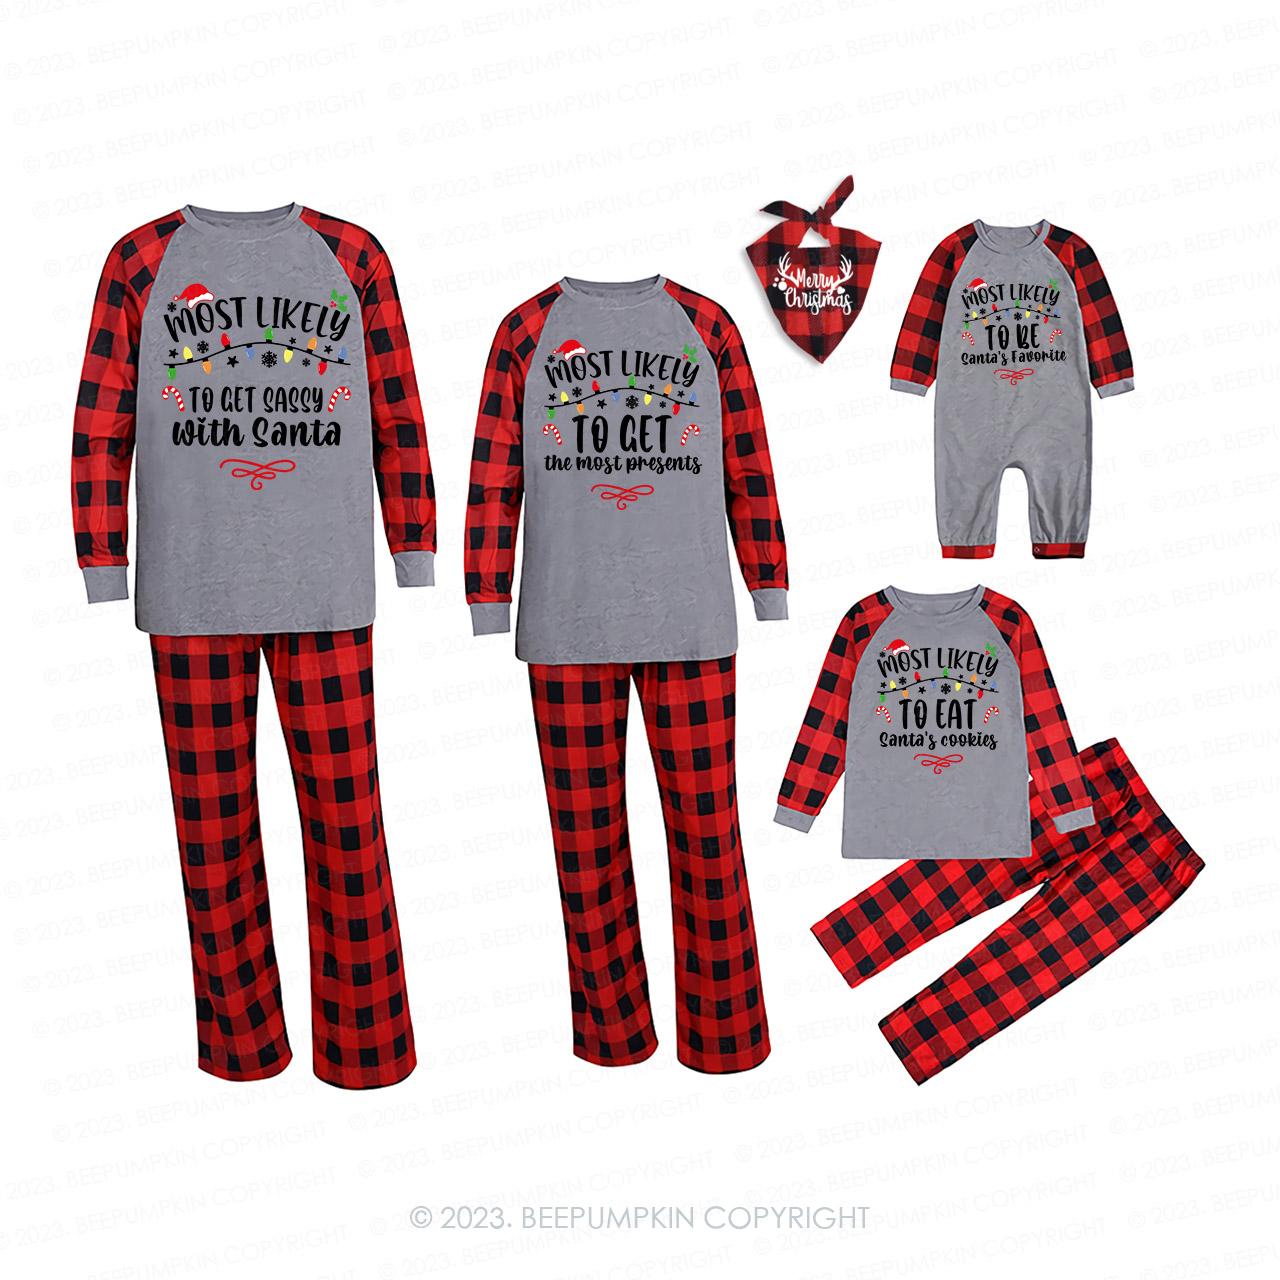 babysbule 2 Piece Sets Prime Big Deals Day 2023 Family Christmas Pajamas  Must Have Travel Items Halloween Christmas Lightning Deals Of Today Prime 2